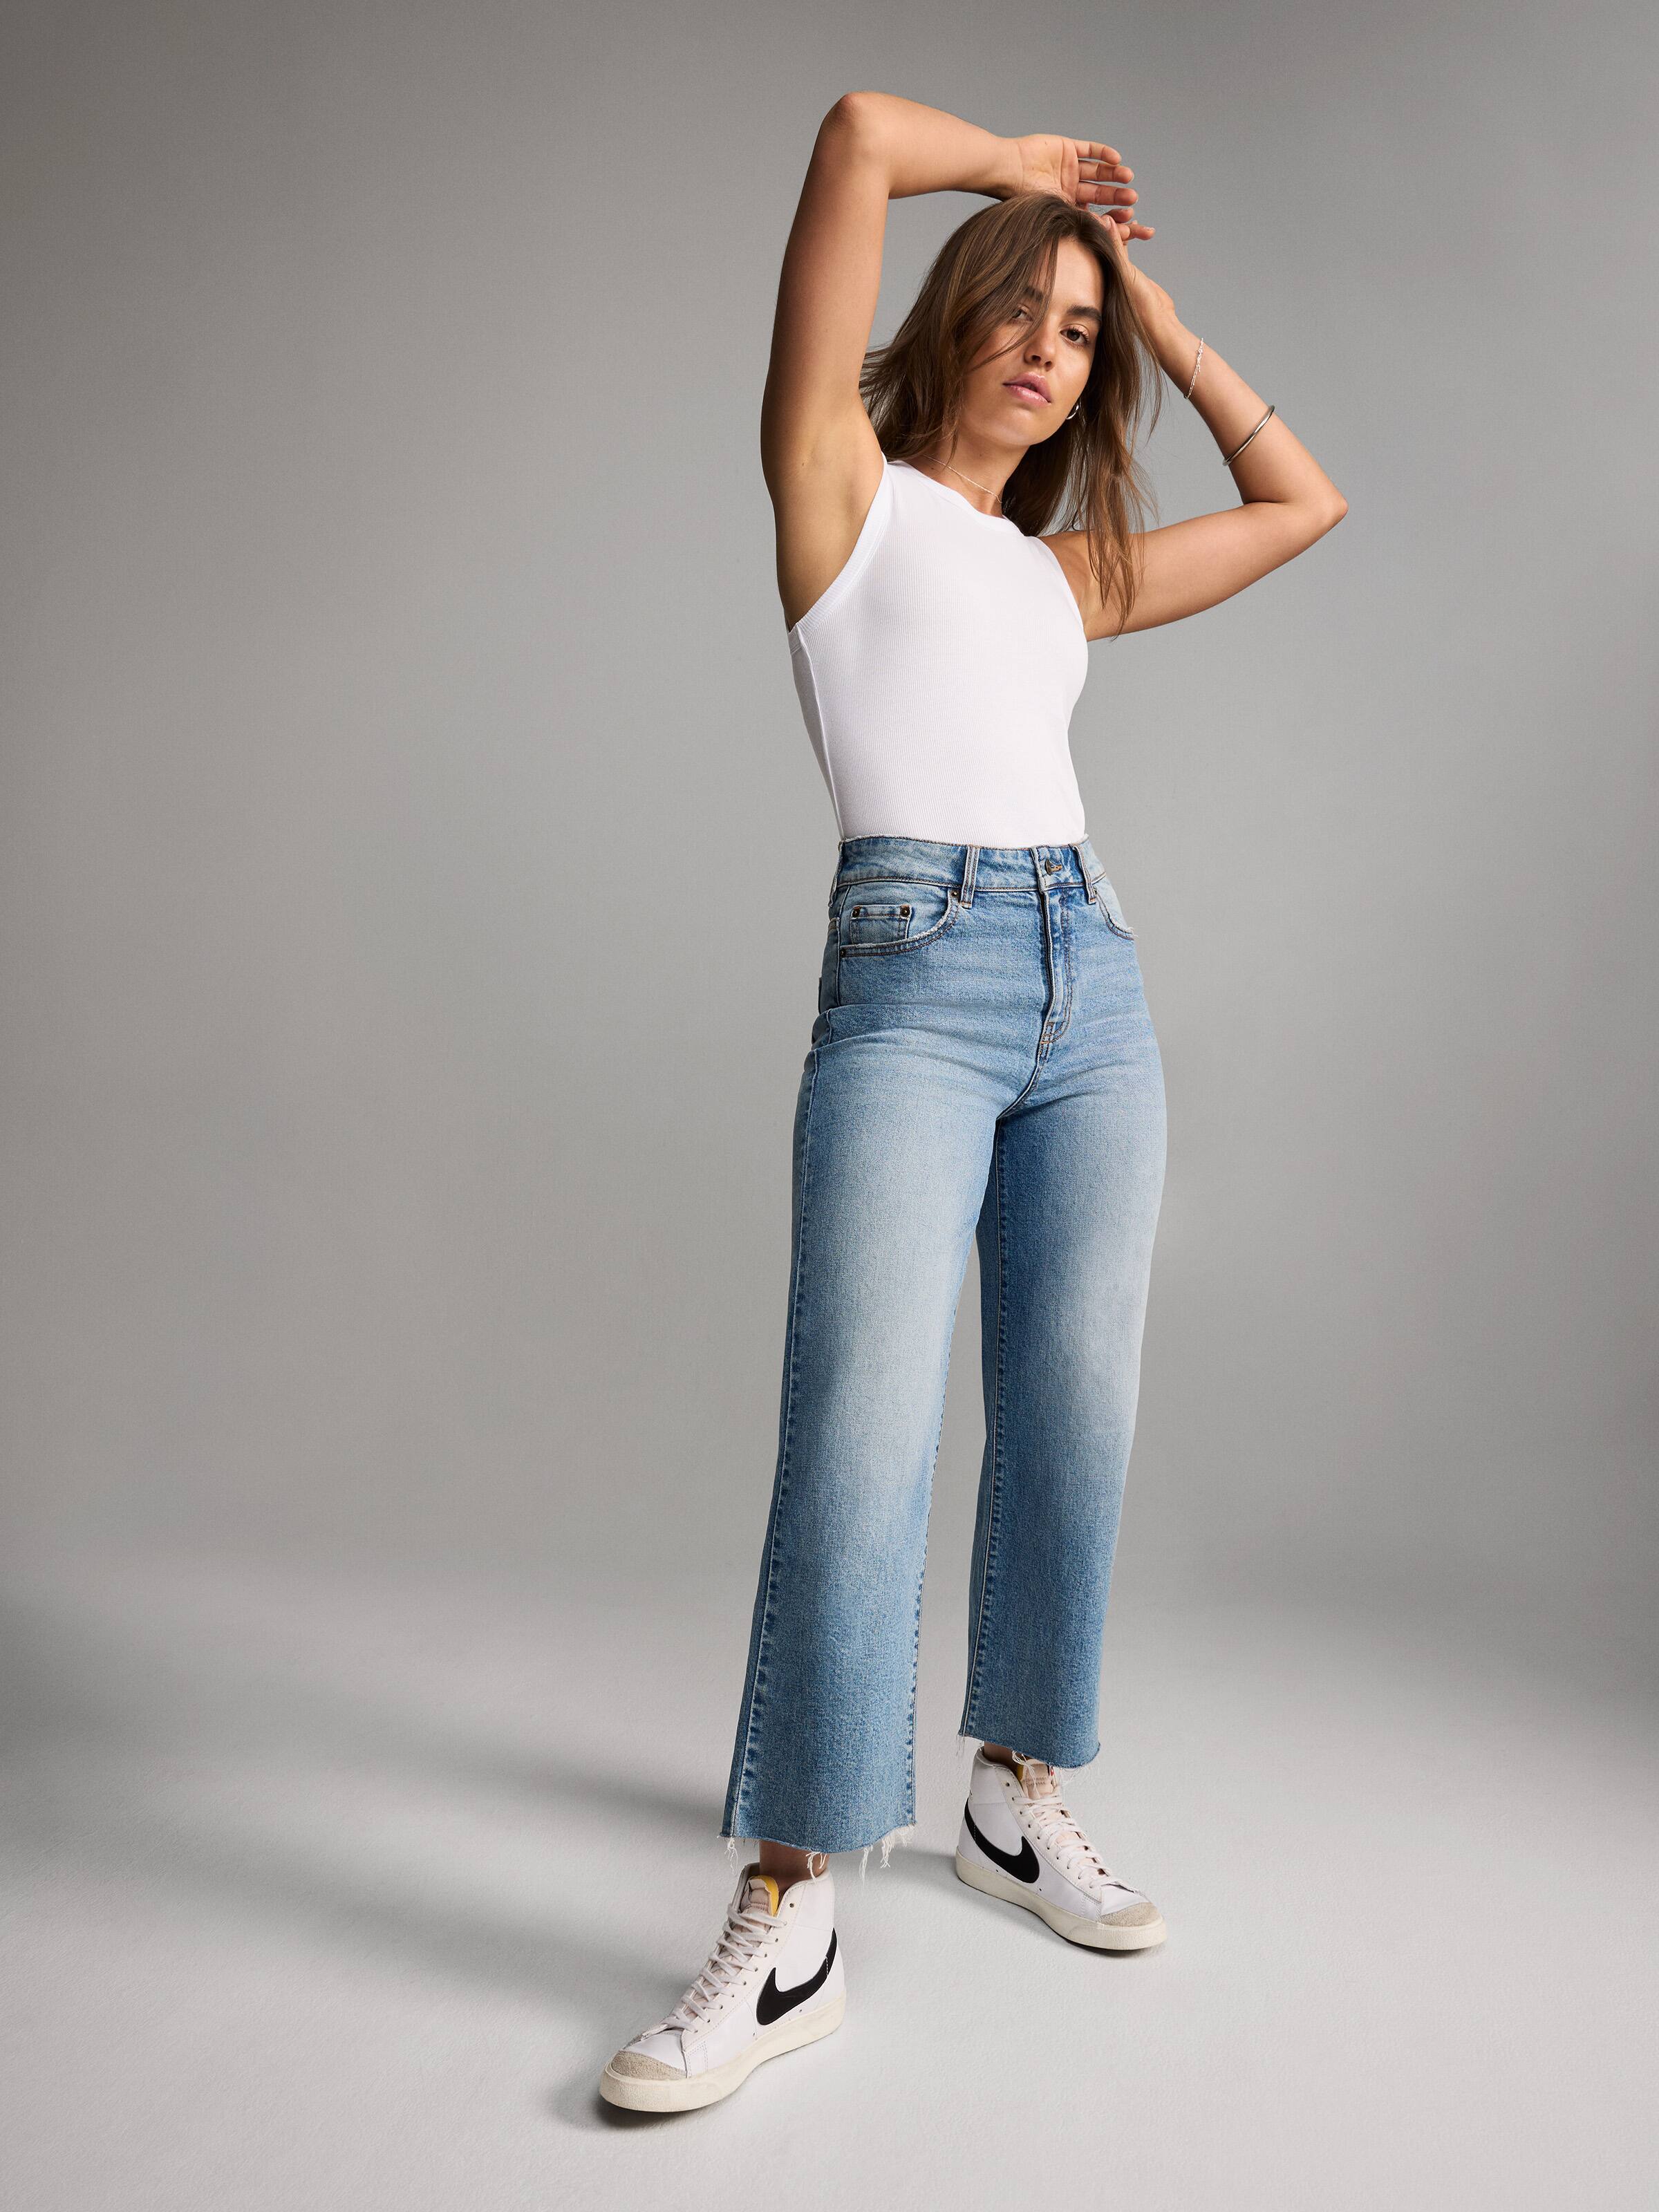 Bleach Wash High-Rise Wide Leg Jeans  Wide leg jeans, Ripped jeans, Ripped  denim pants